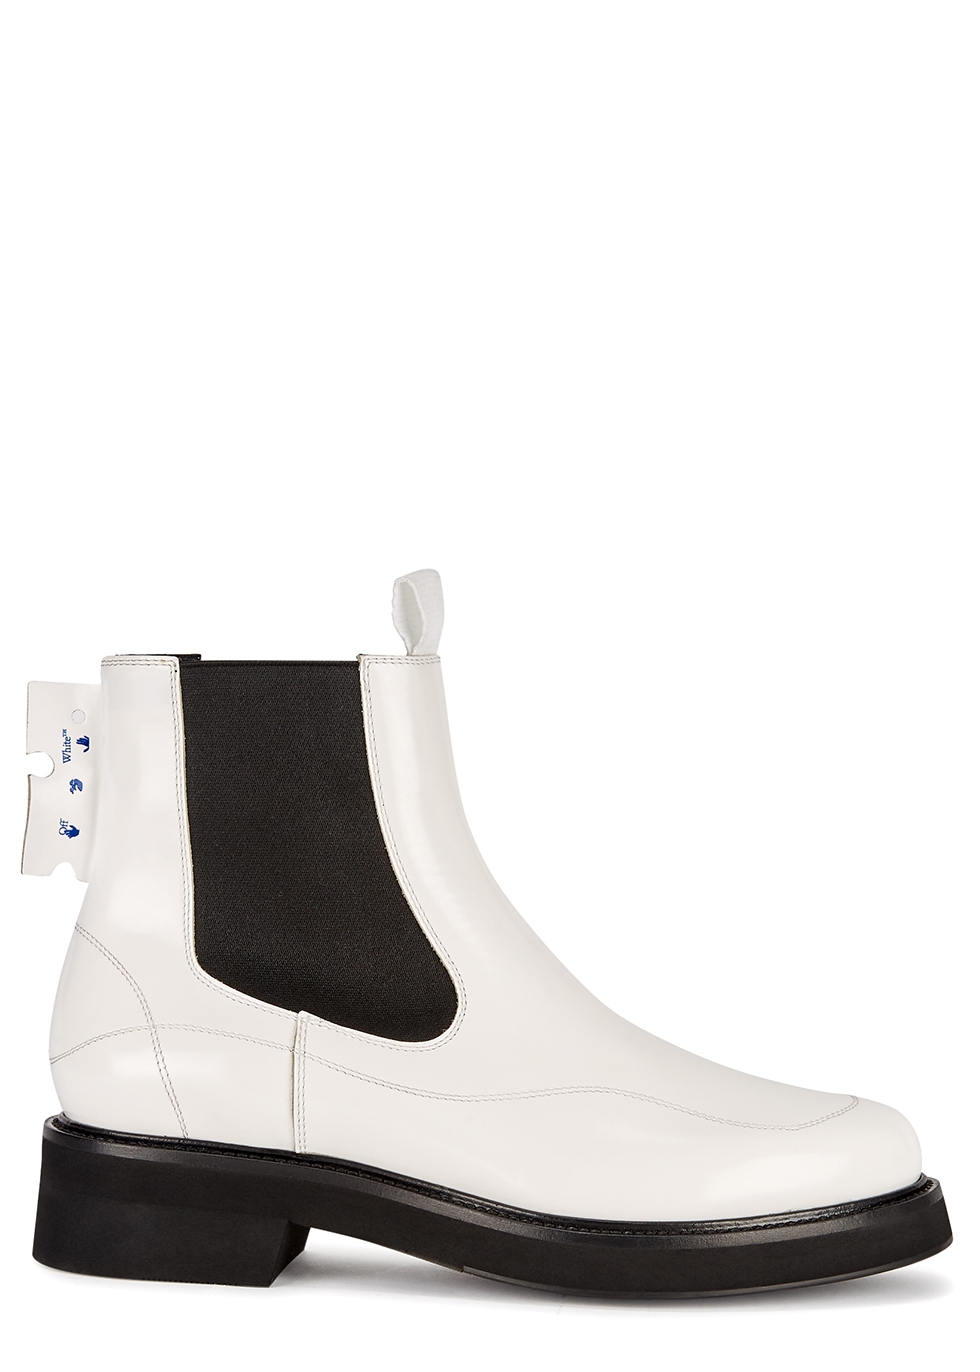 all white chelsea boots